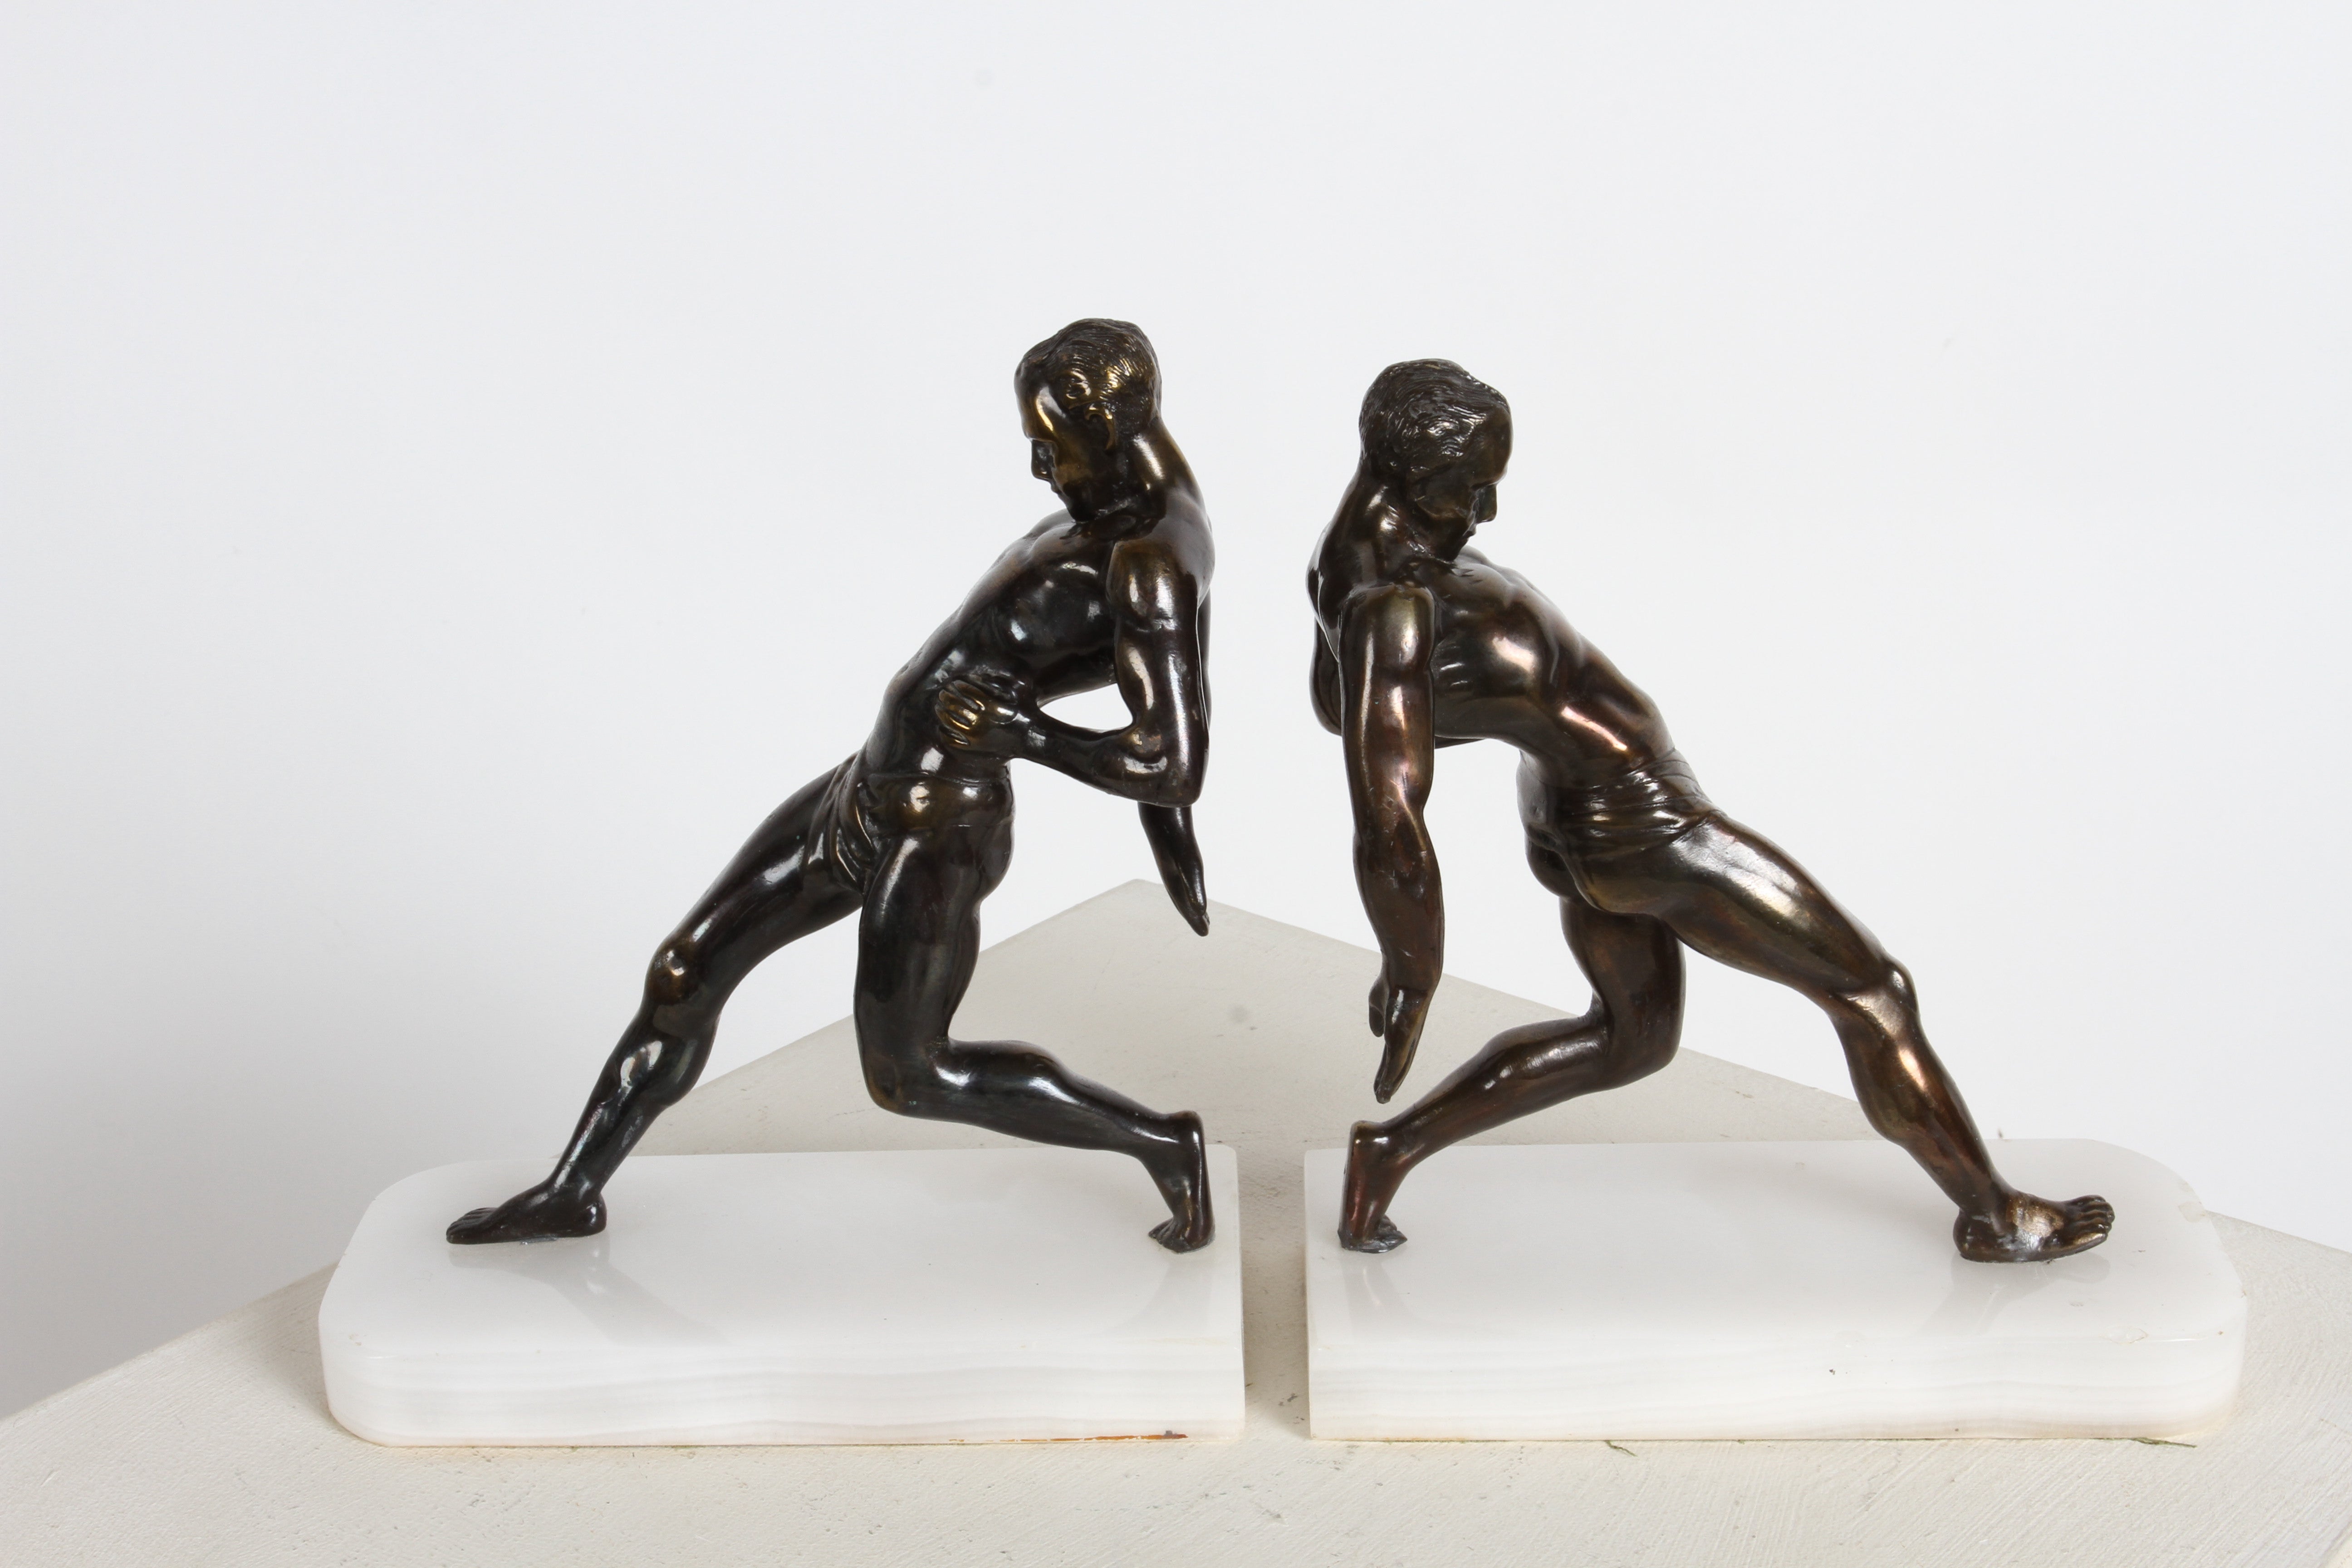 Pair of classical form Art Deco semi nude male athletic runner bookends on white alabaster bases. Attributed to artist  R. Vramant, France 1930s. Made of Spelter with bronze plating. Some minor chips to alabaster, see photo. 